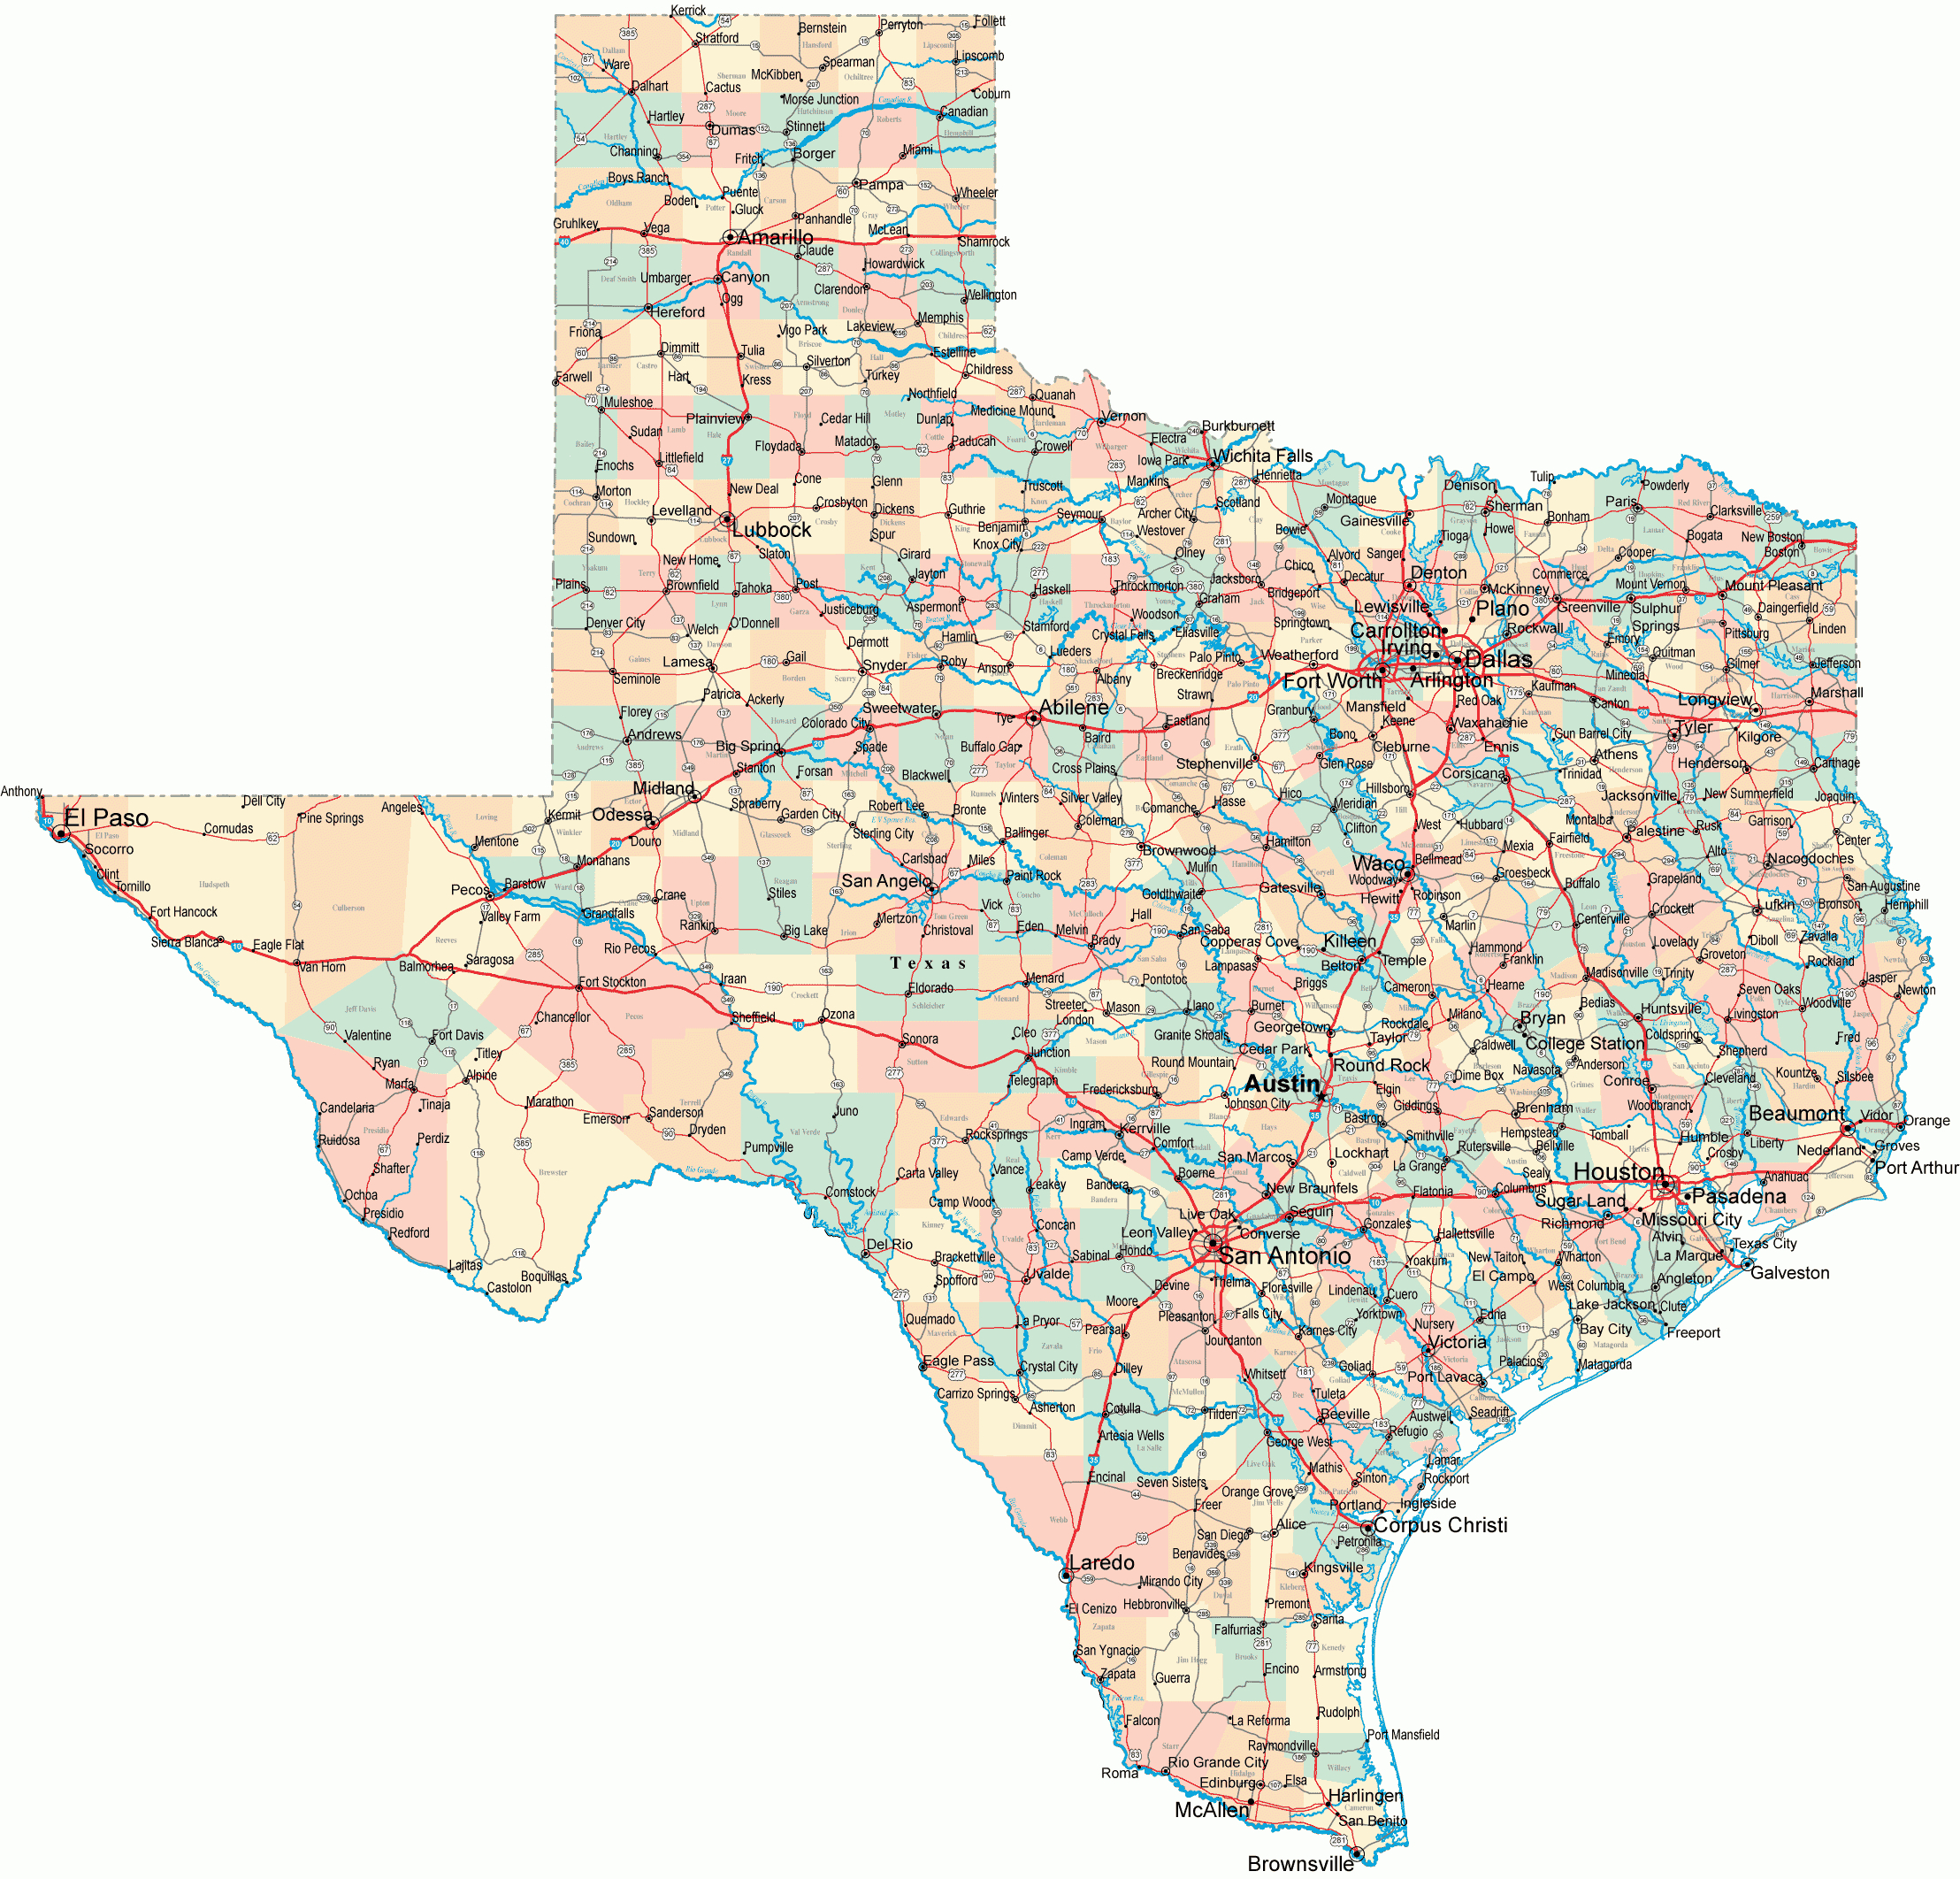 Texas Road Map - Tx Road Map - Texas Highway Map - I 35 Central Texas Traffic Map